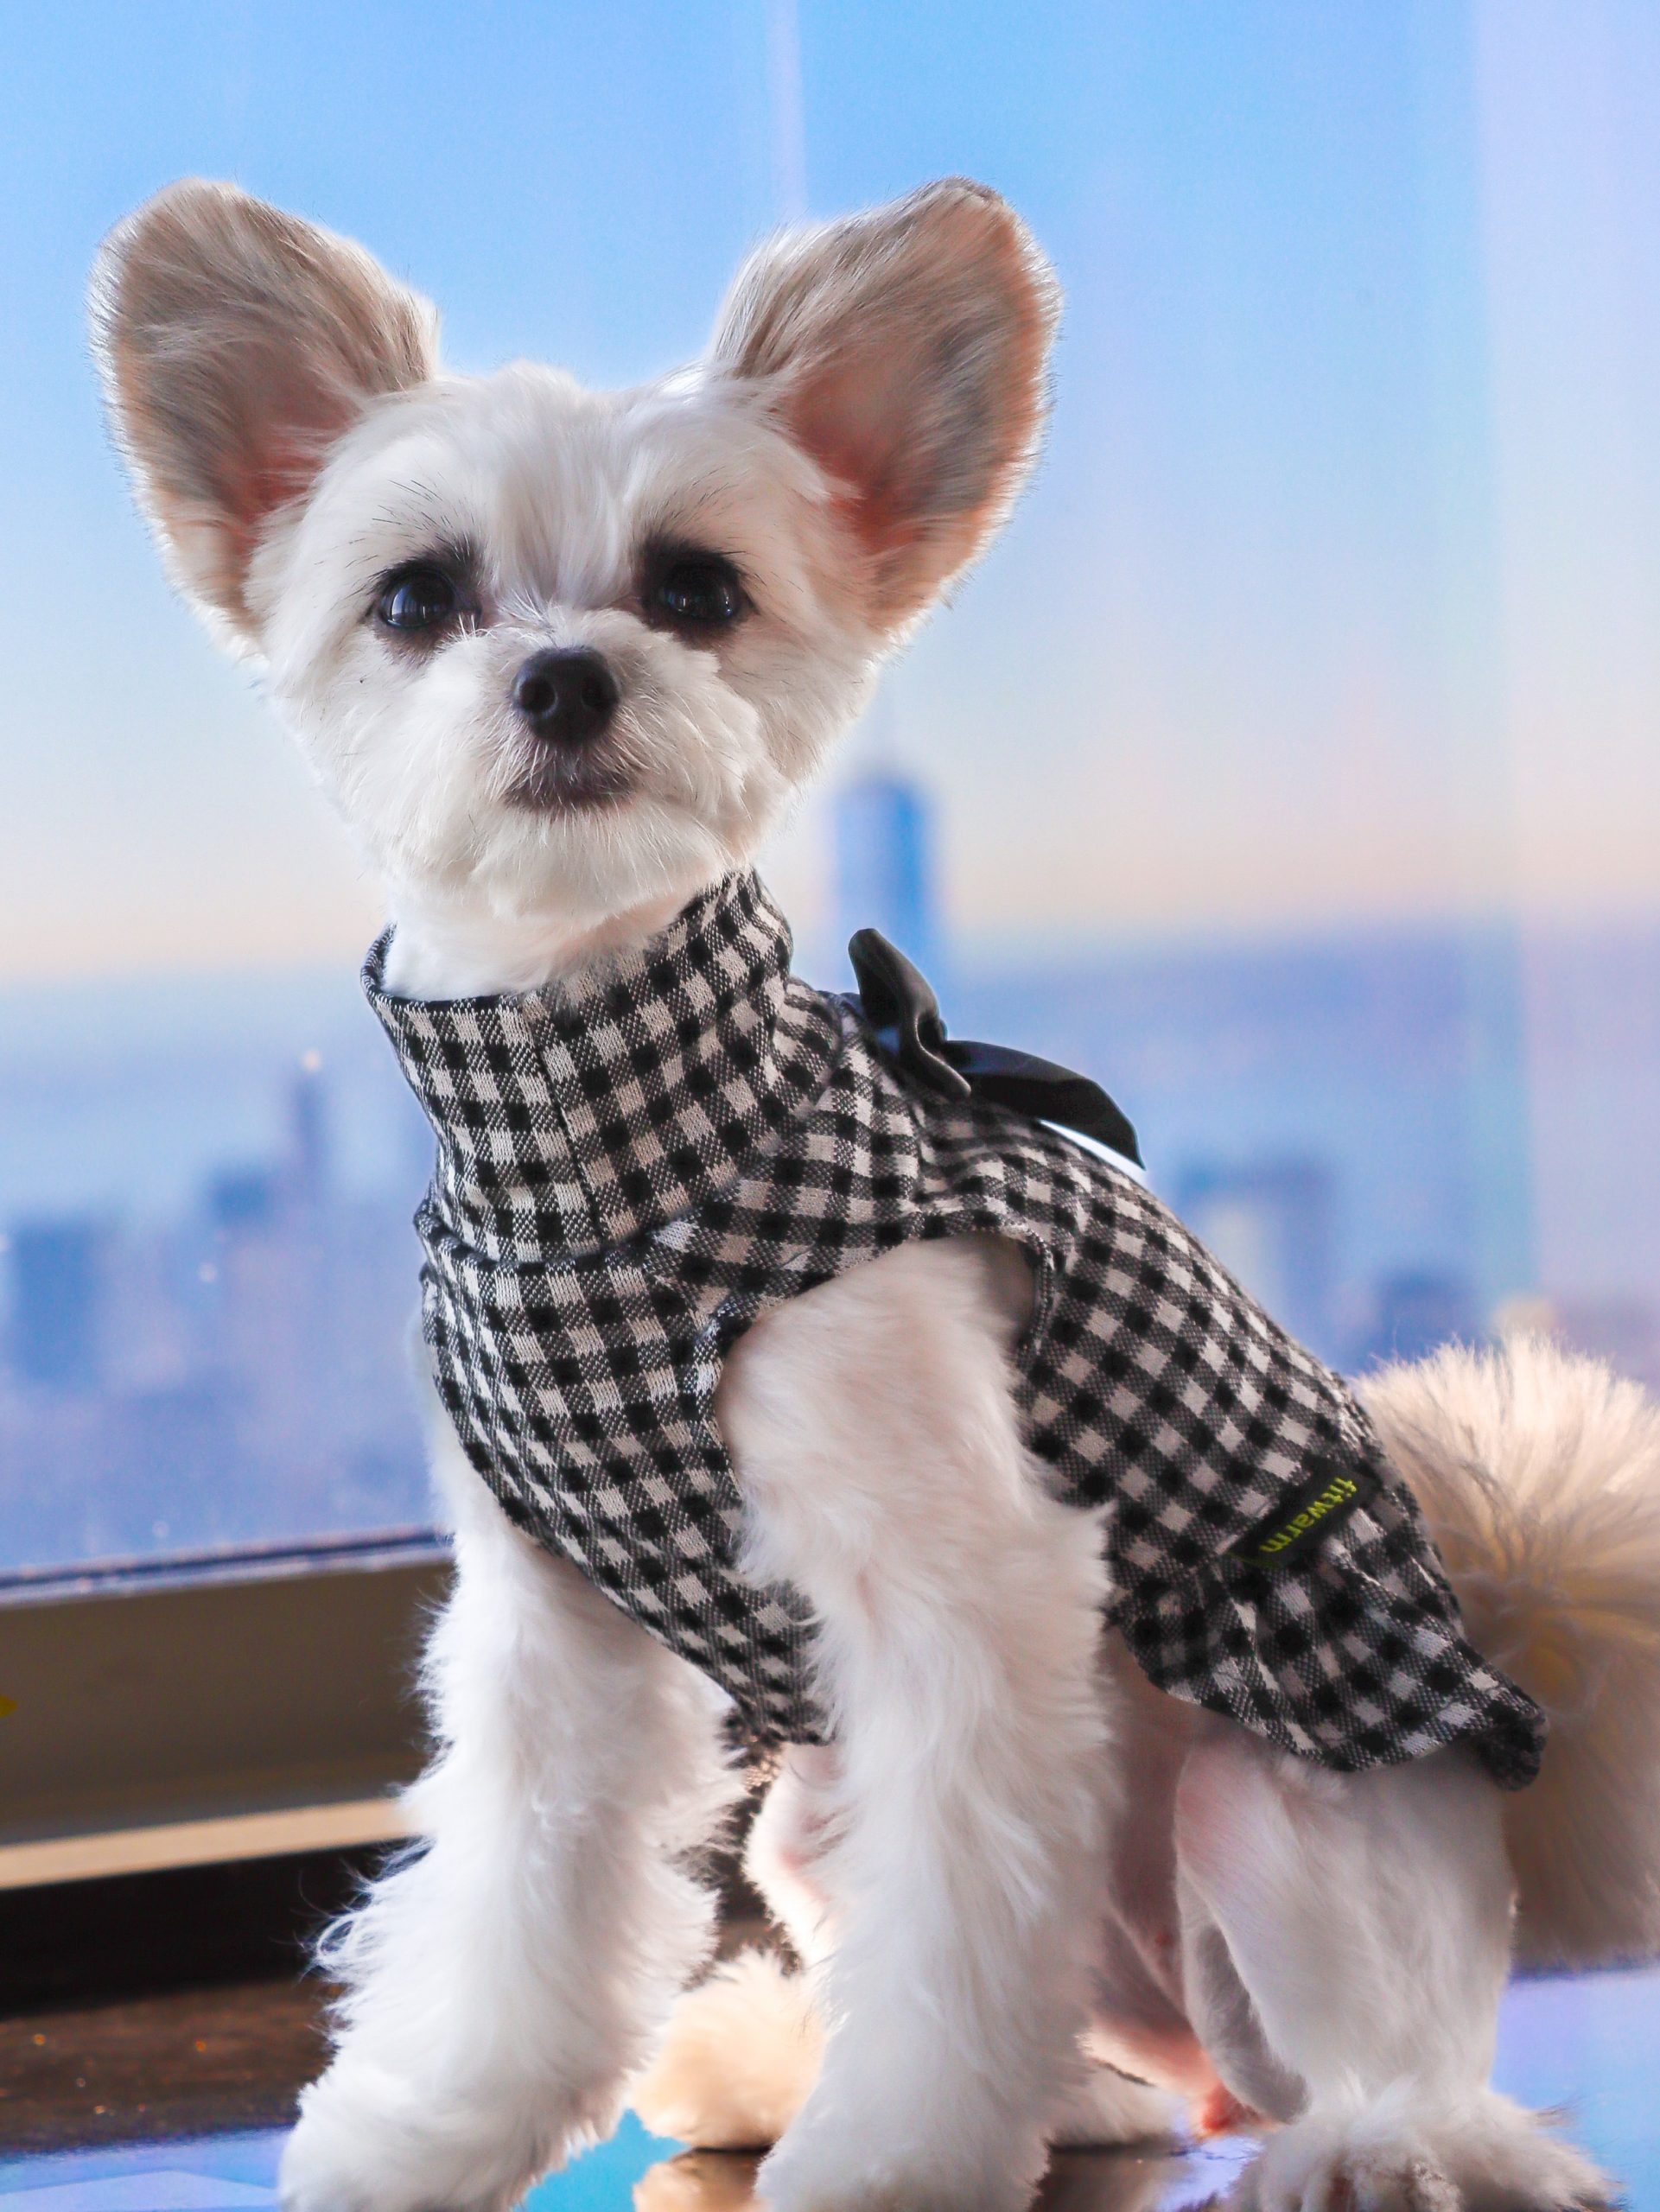 Make Way For Luxury Pet Accessories And Fashion From The Finest